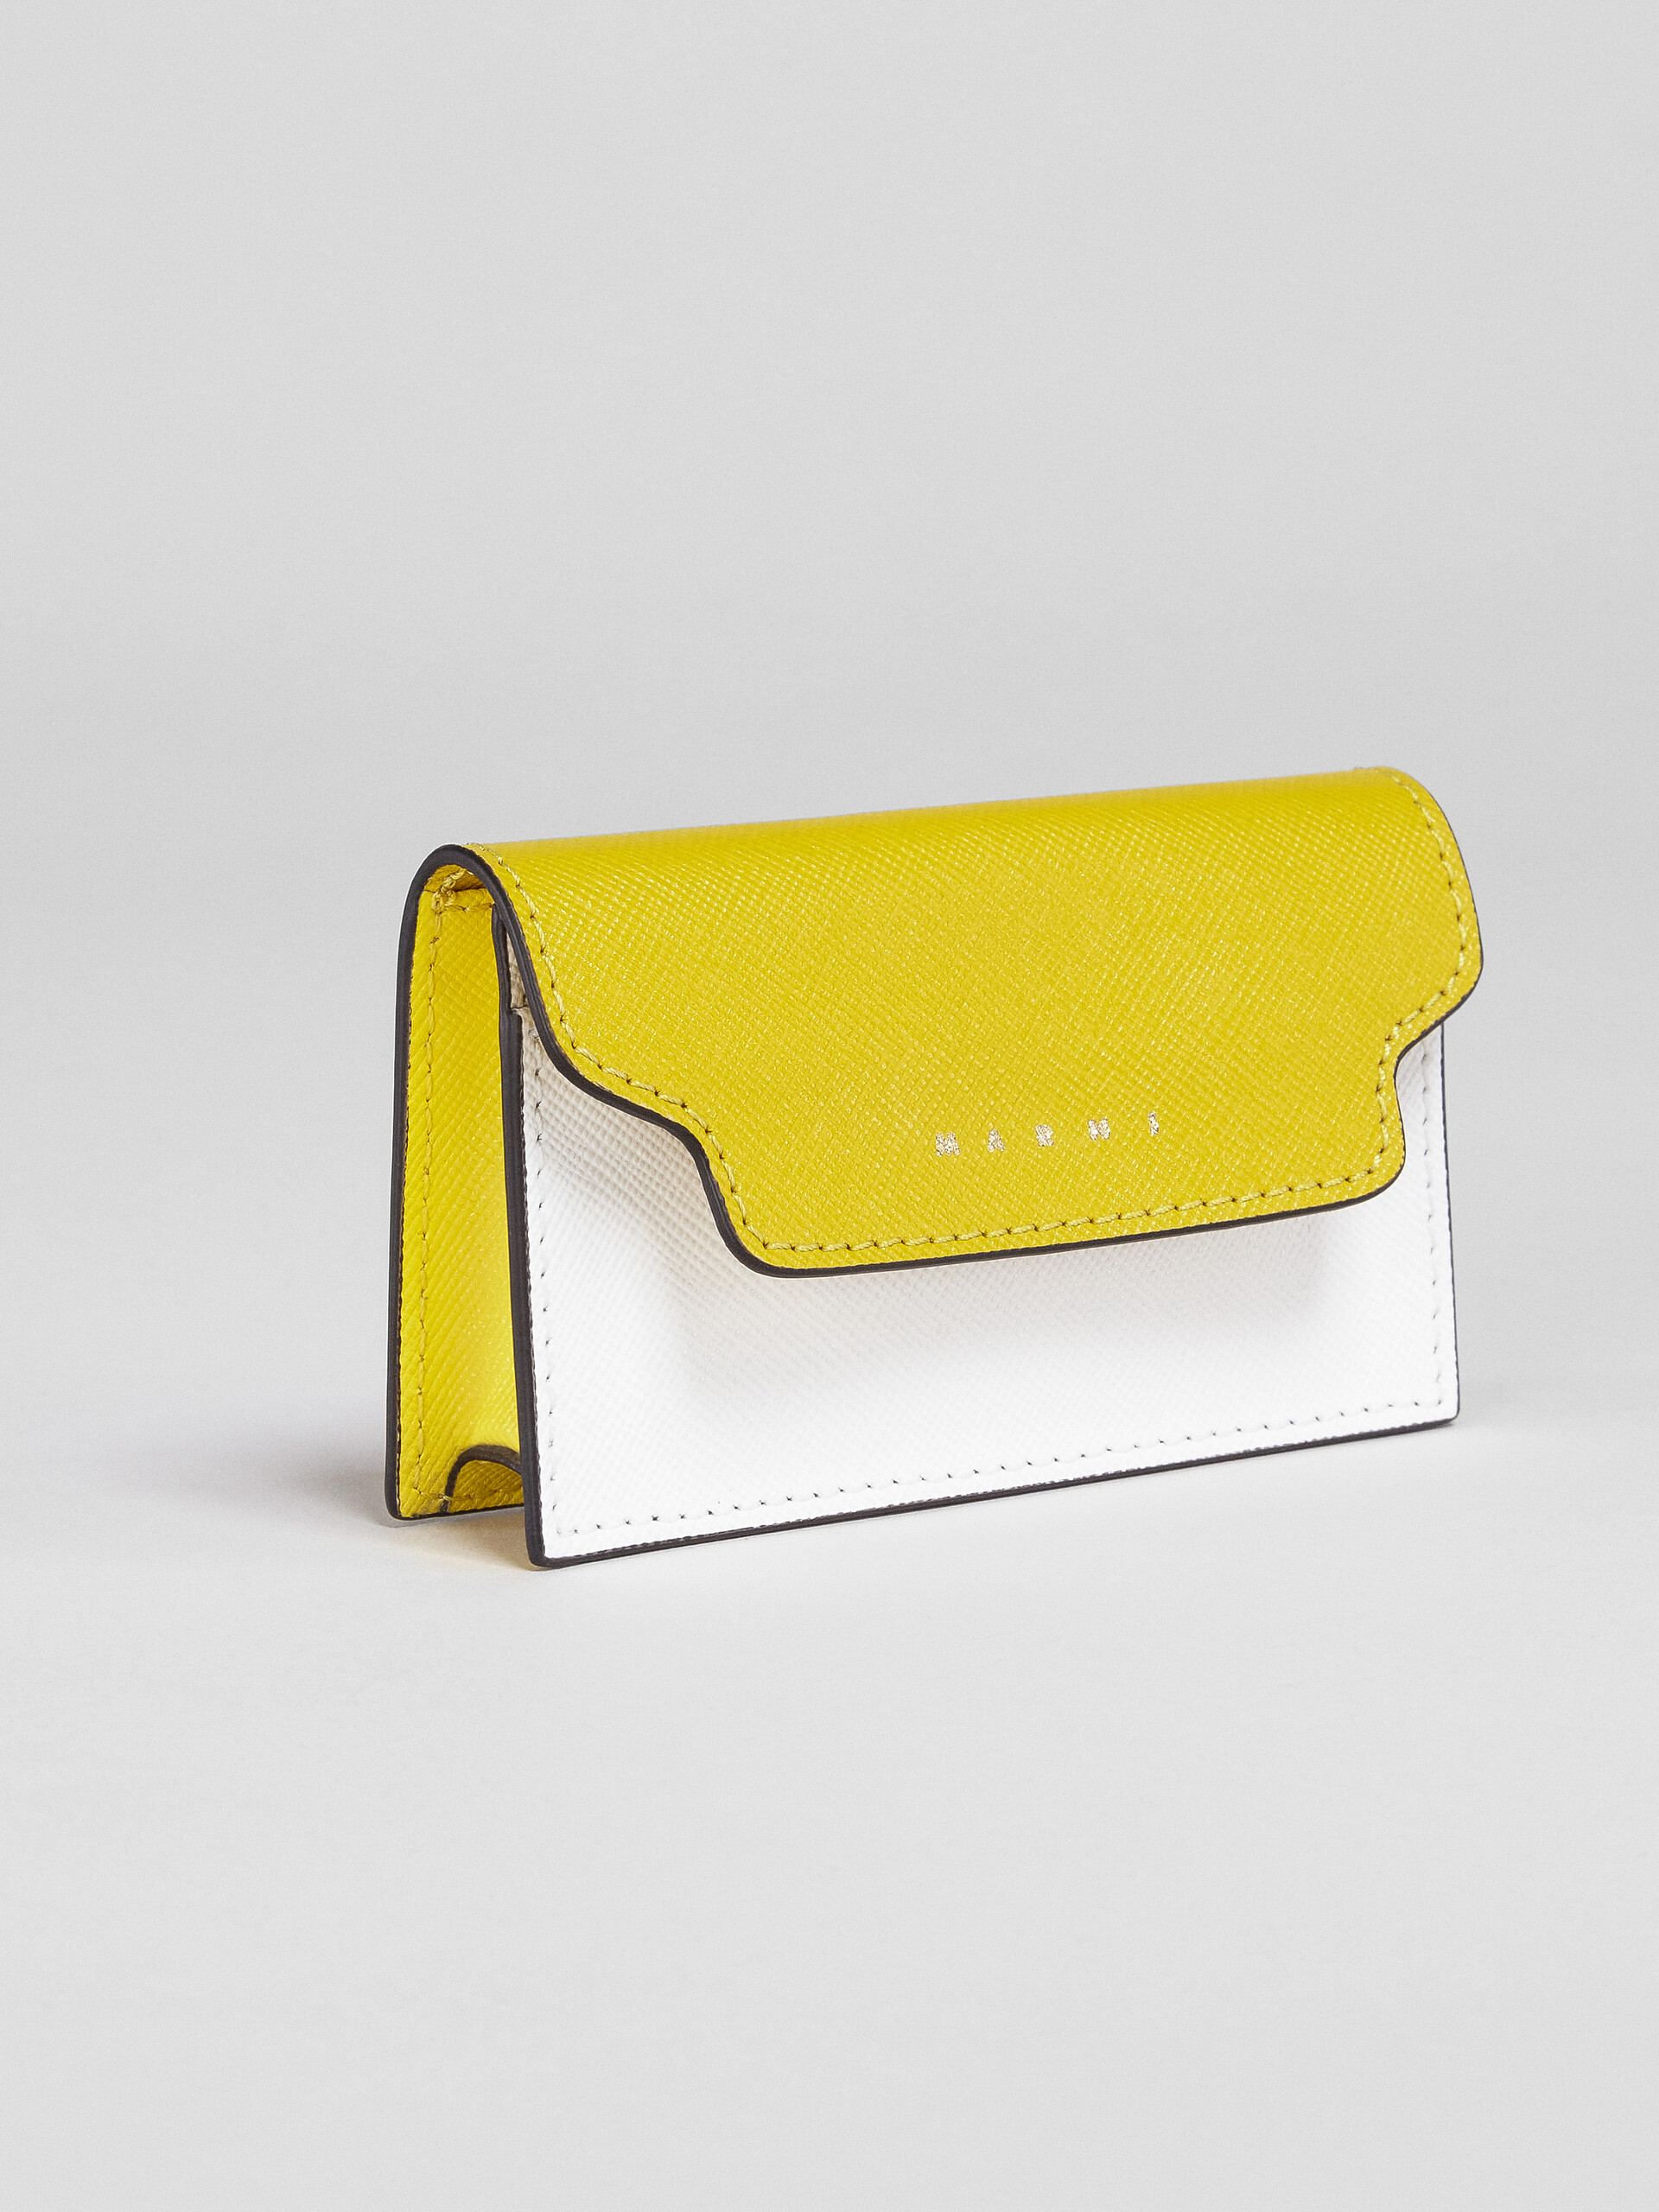 Yellow and white saffiano business card case - Wallets - Image 3